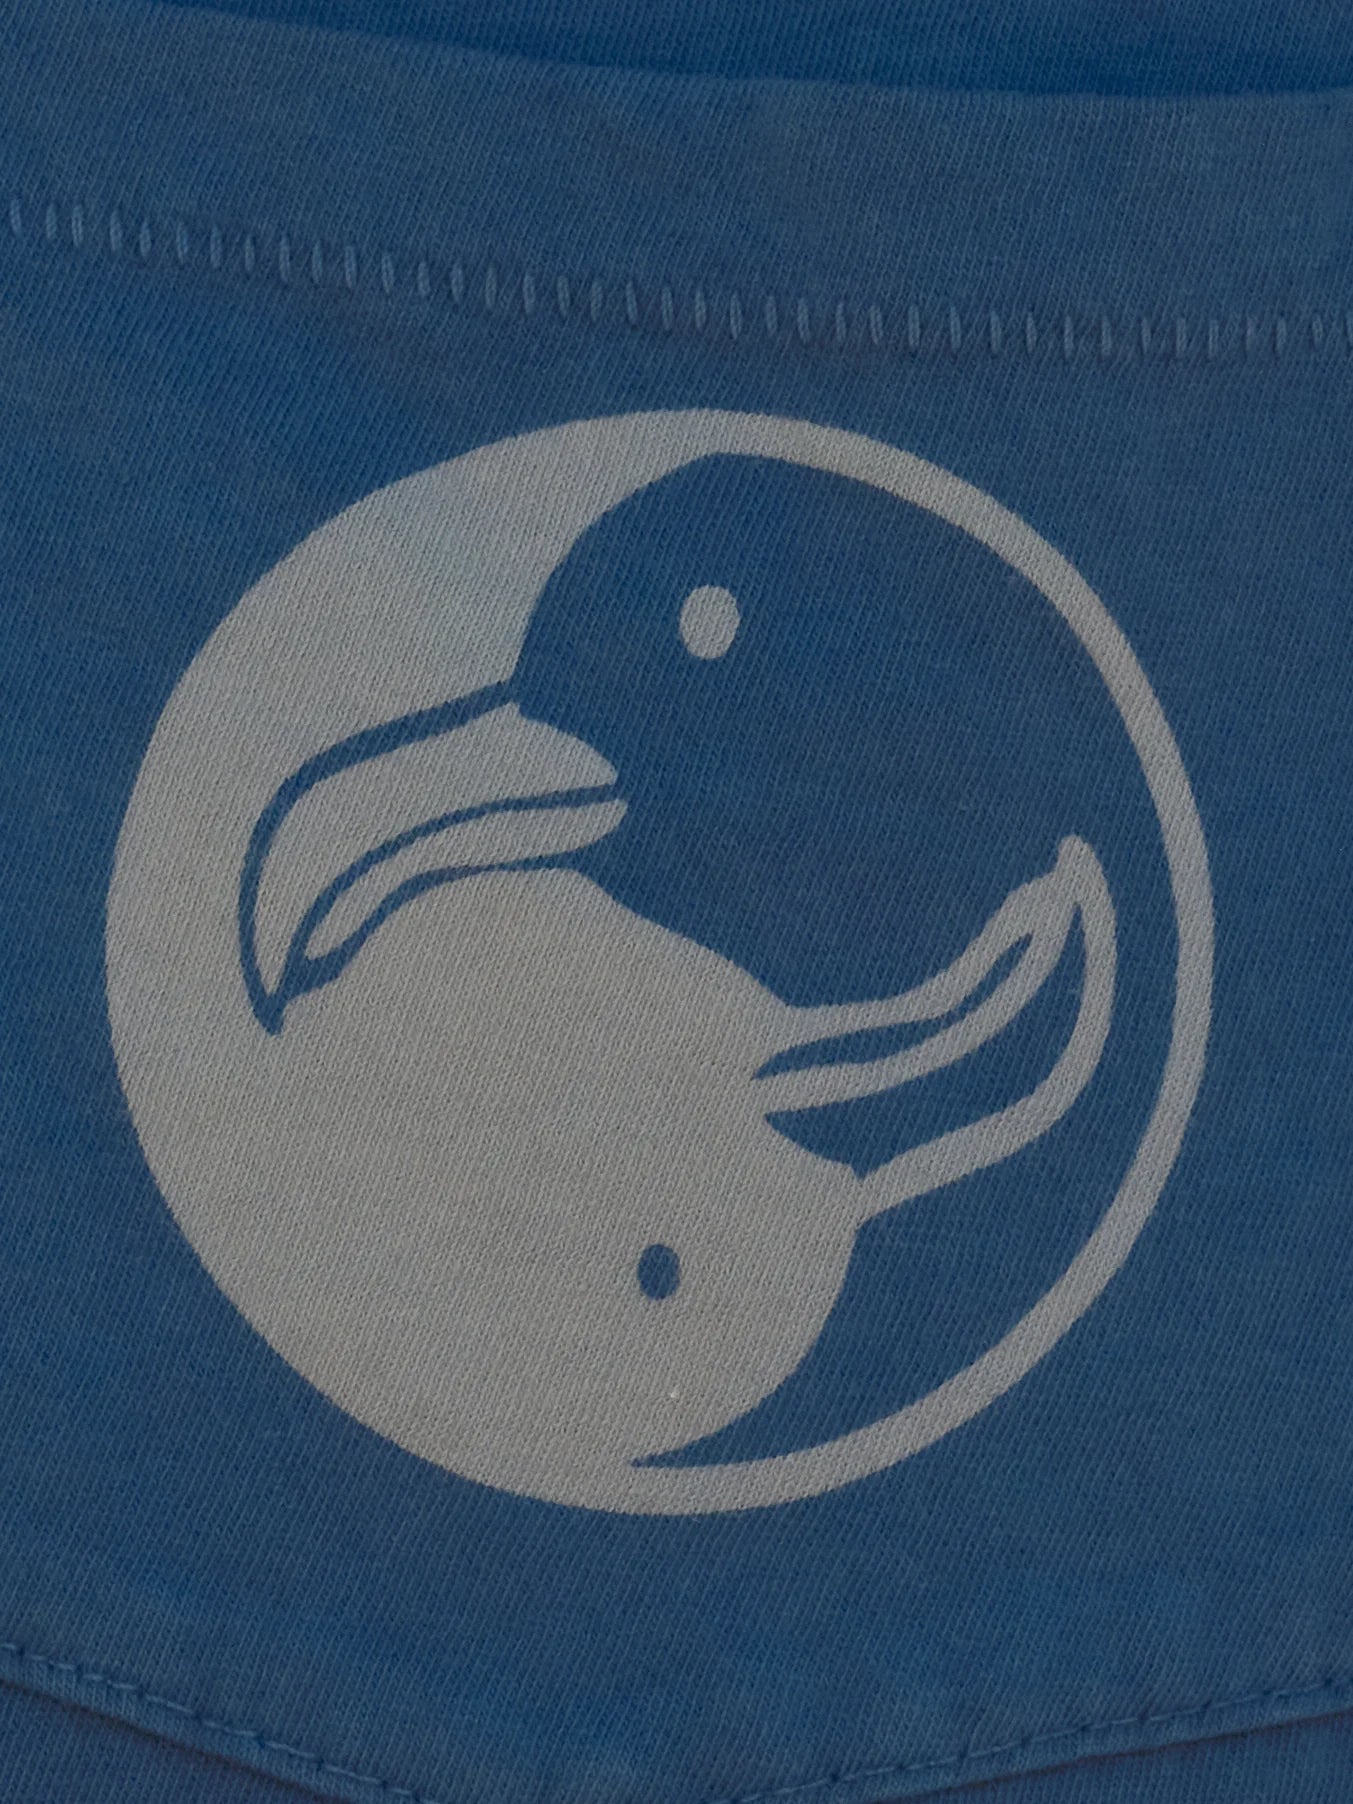 close up view of the seabird graphic on the Surf Society tee by Mollusk